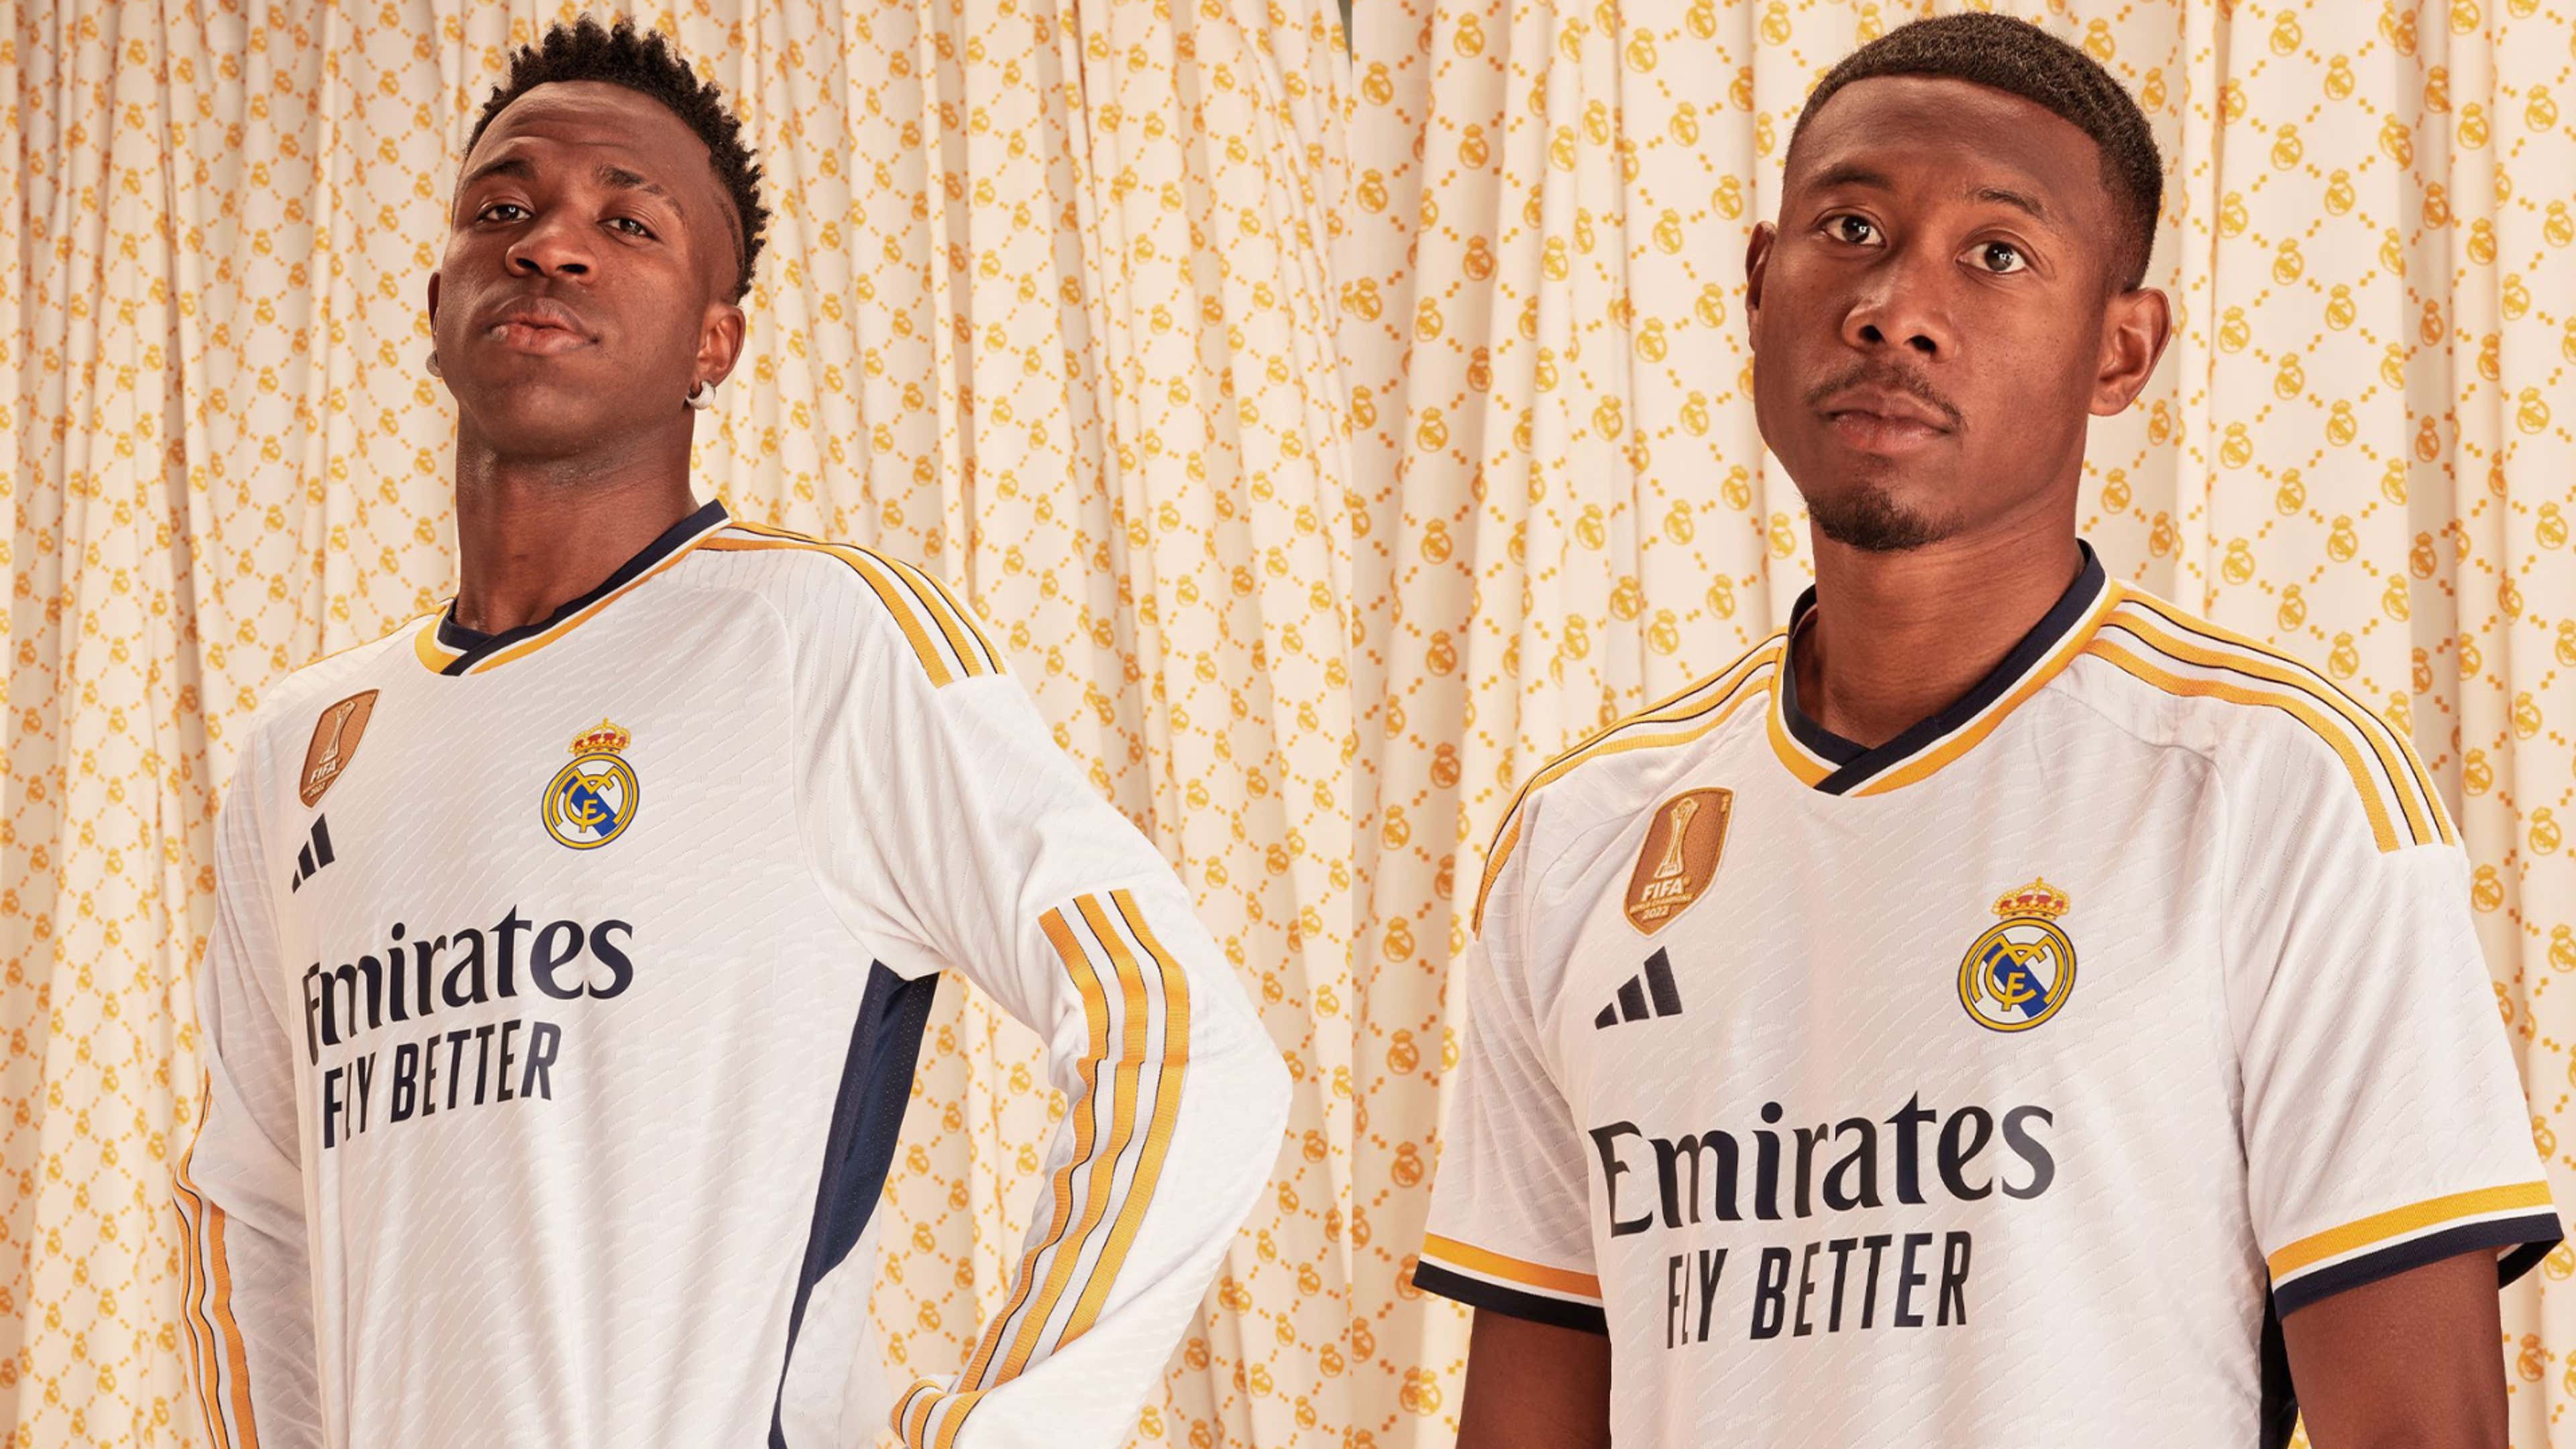 The new jersey for the 2022-23 season, Real Madrid CF